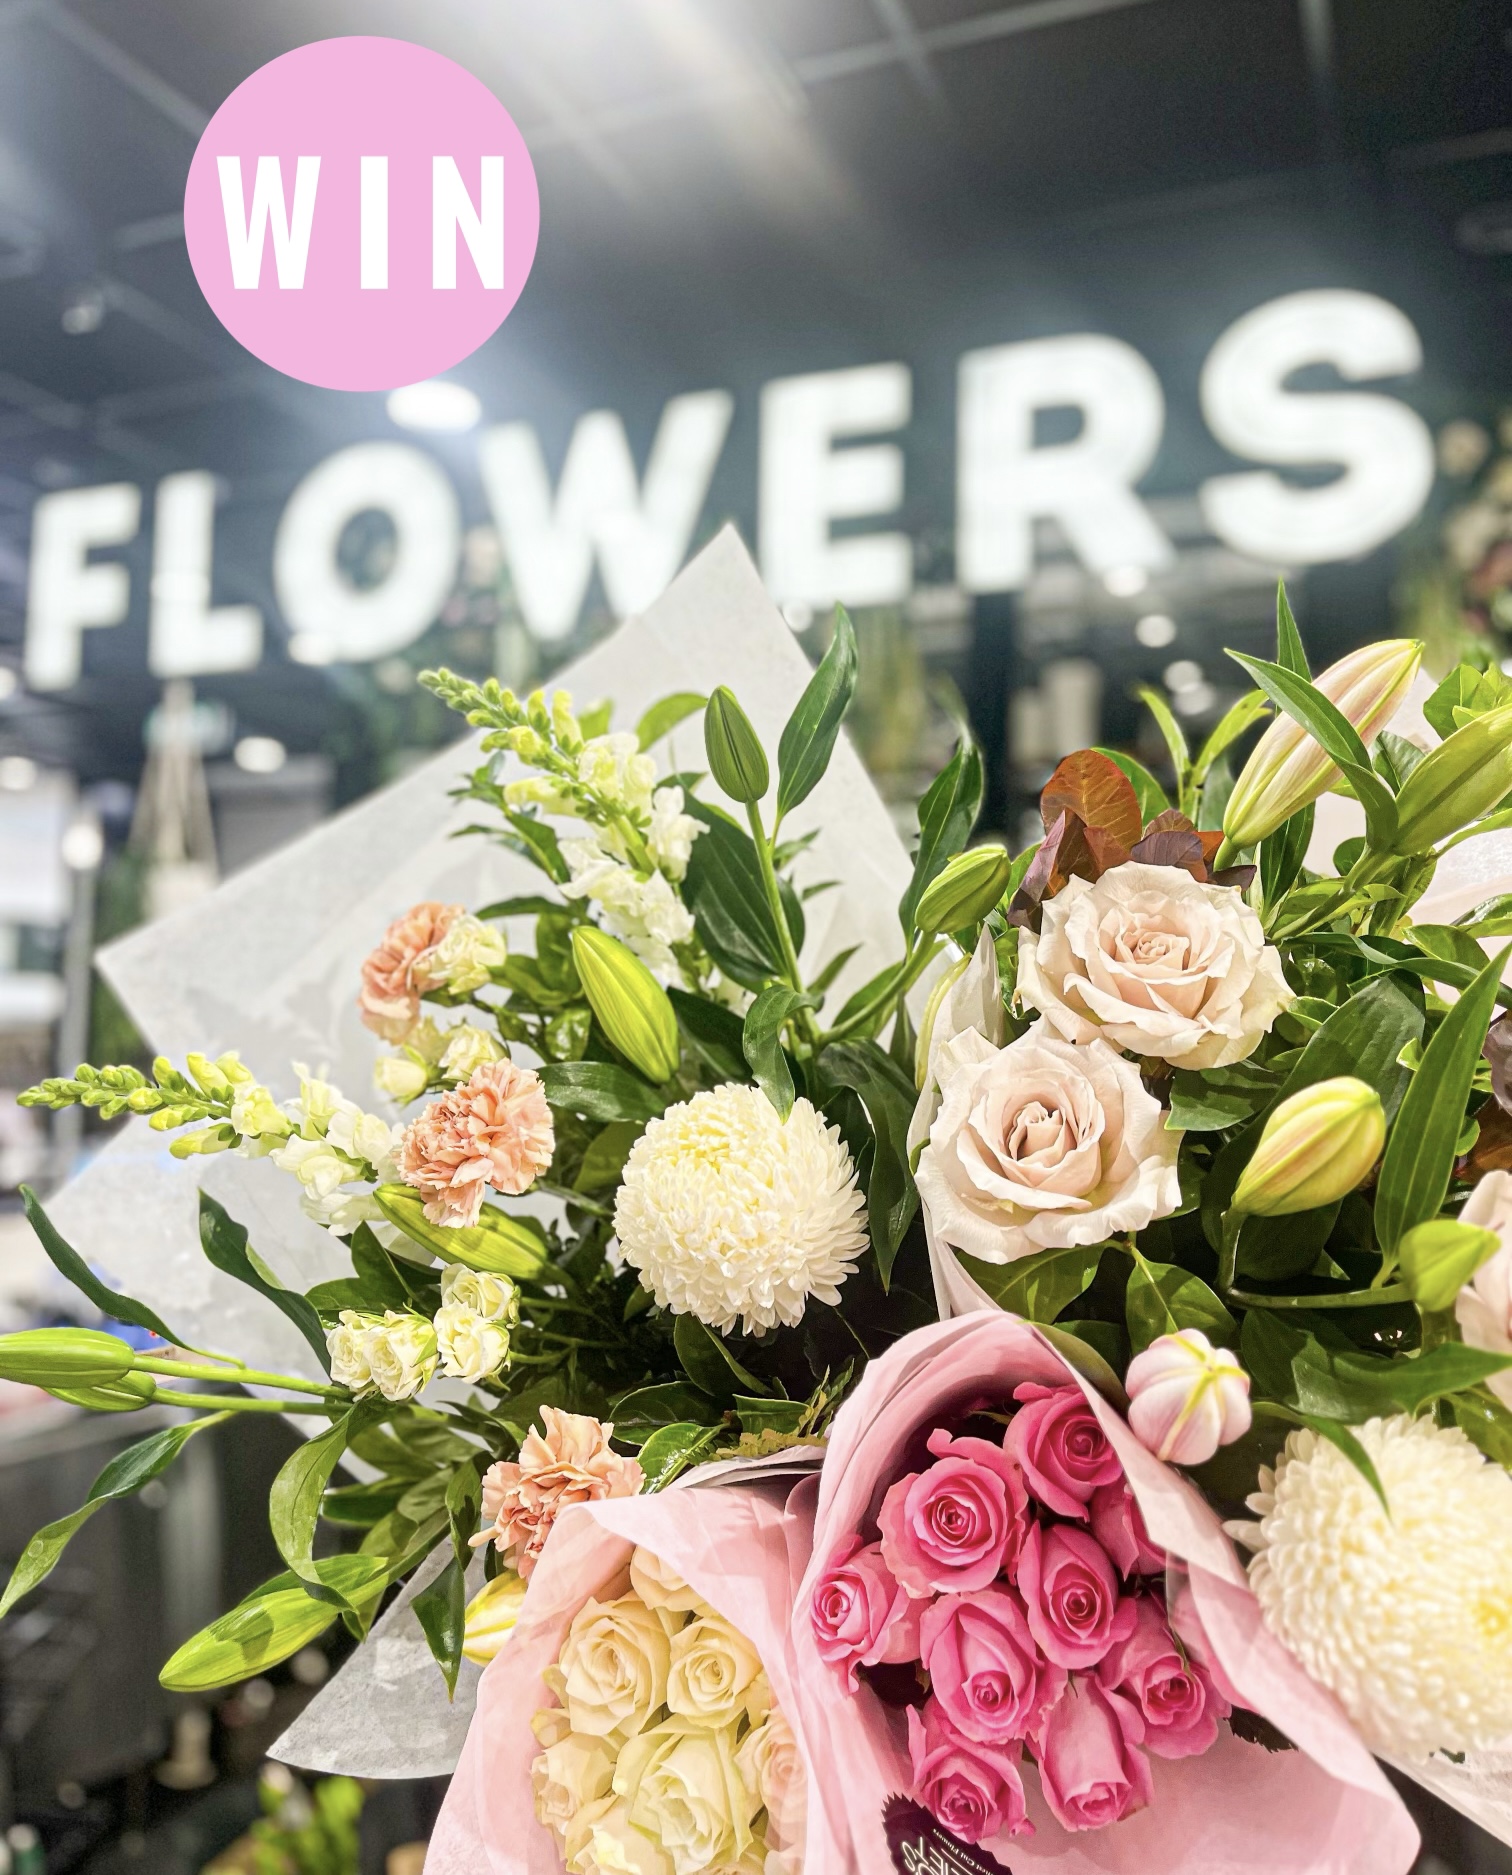 WIN two HUUUGE bunches of flowers from Romeo’s this Valentine’s Day!